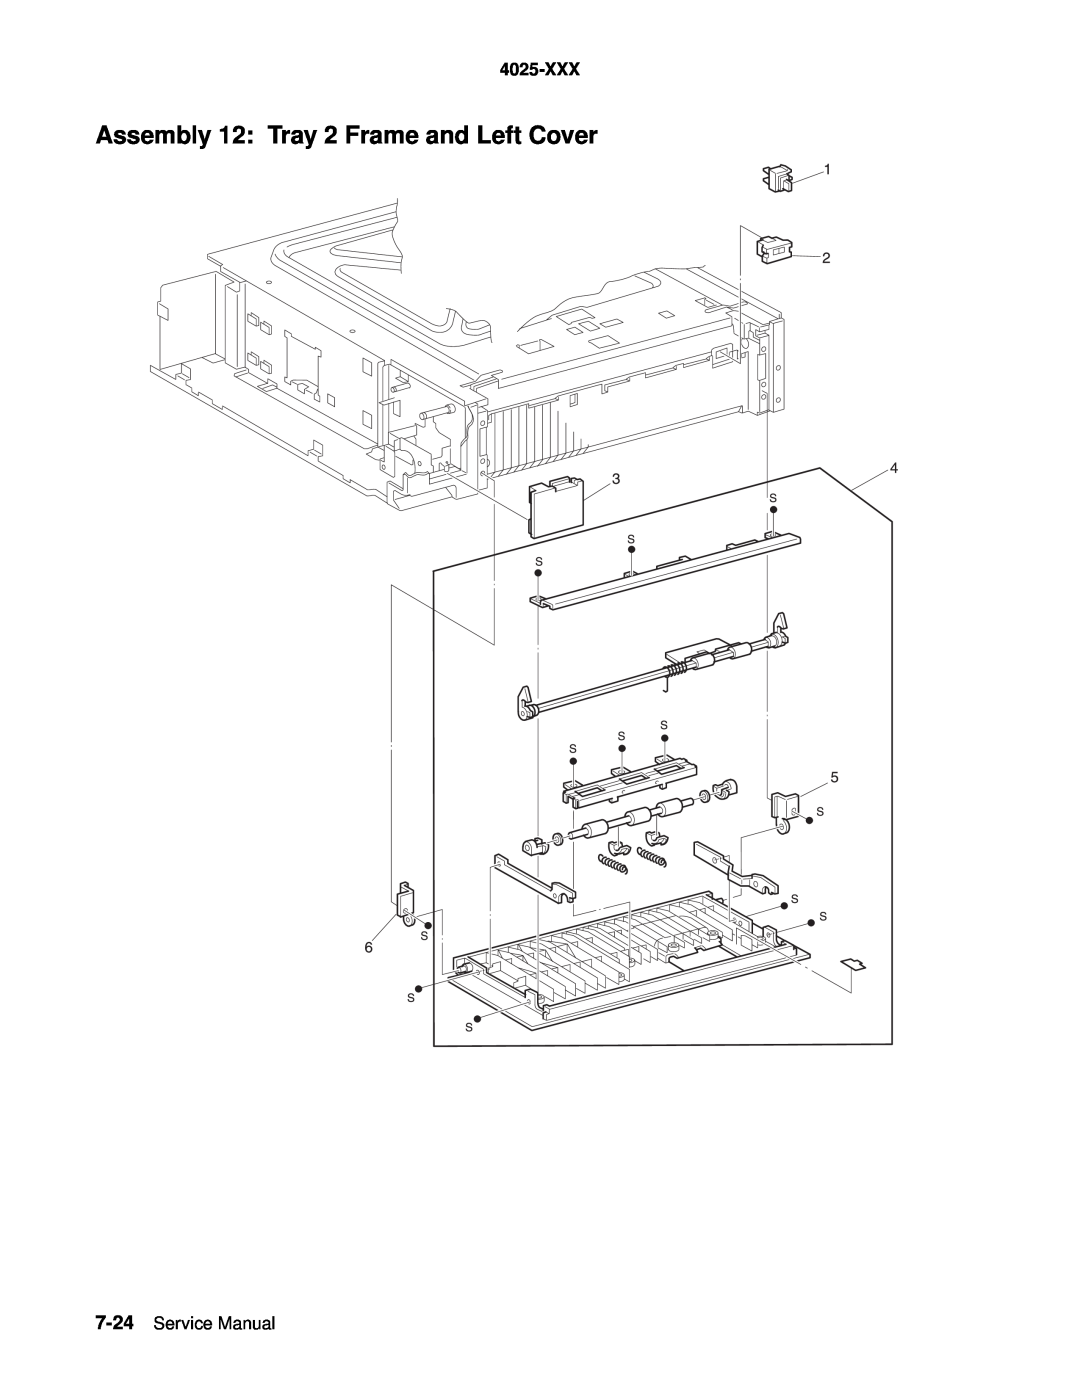 Lexmark W820 service manual Assembly 12 Tray 2 Frame and Left Cover, 4025-XXX, Service Manual 